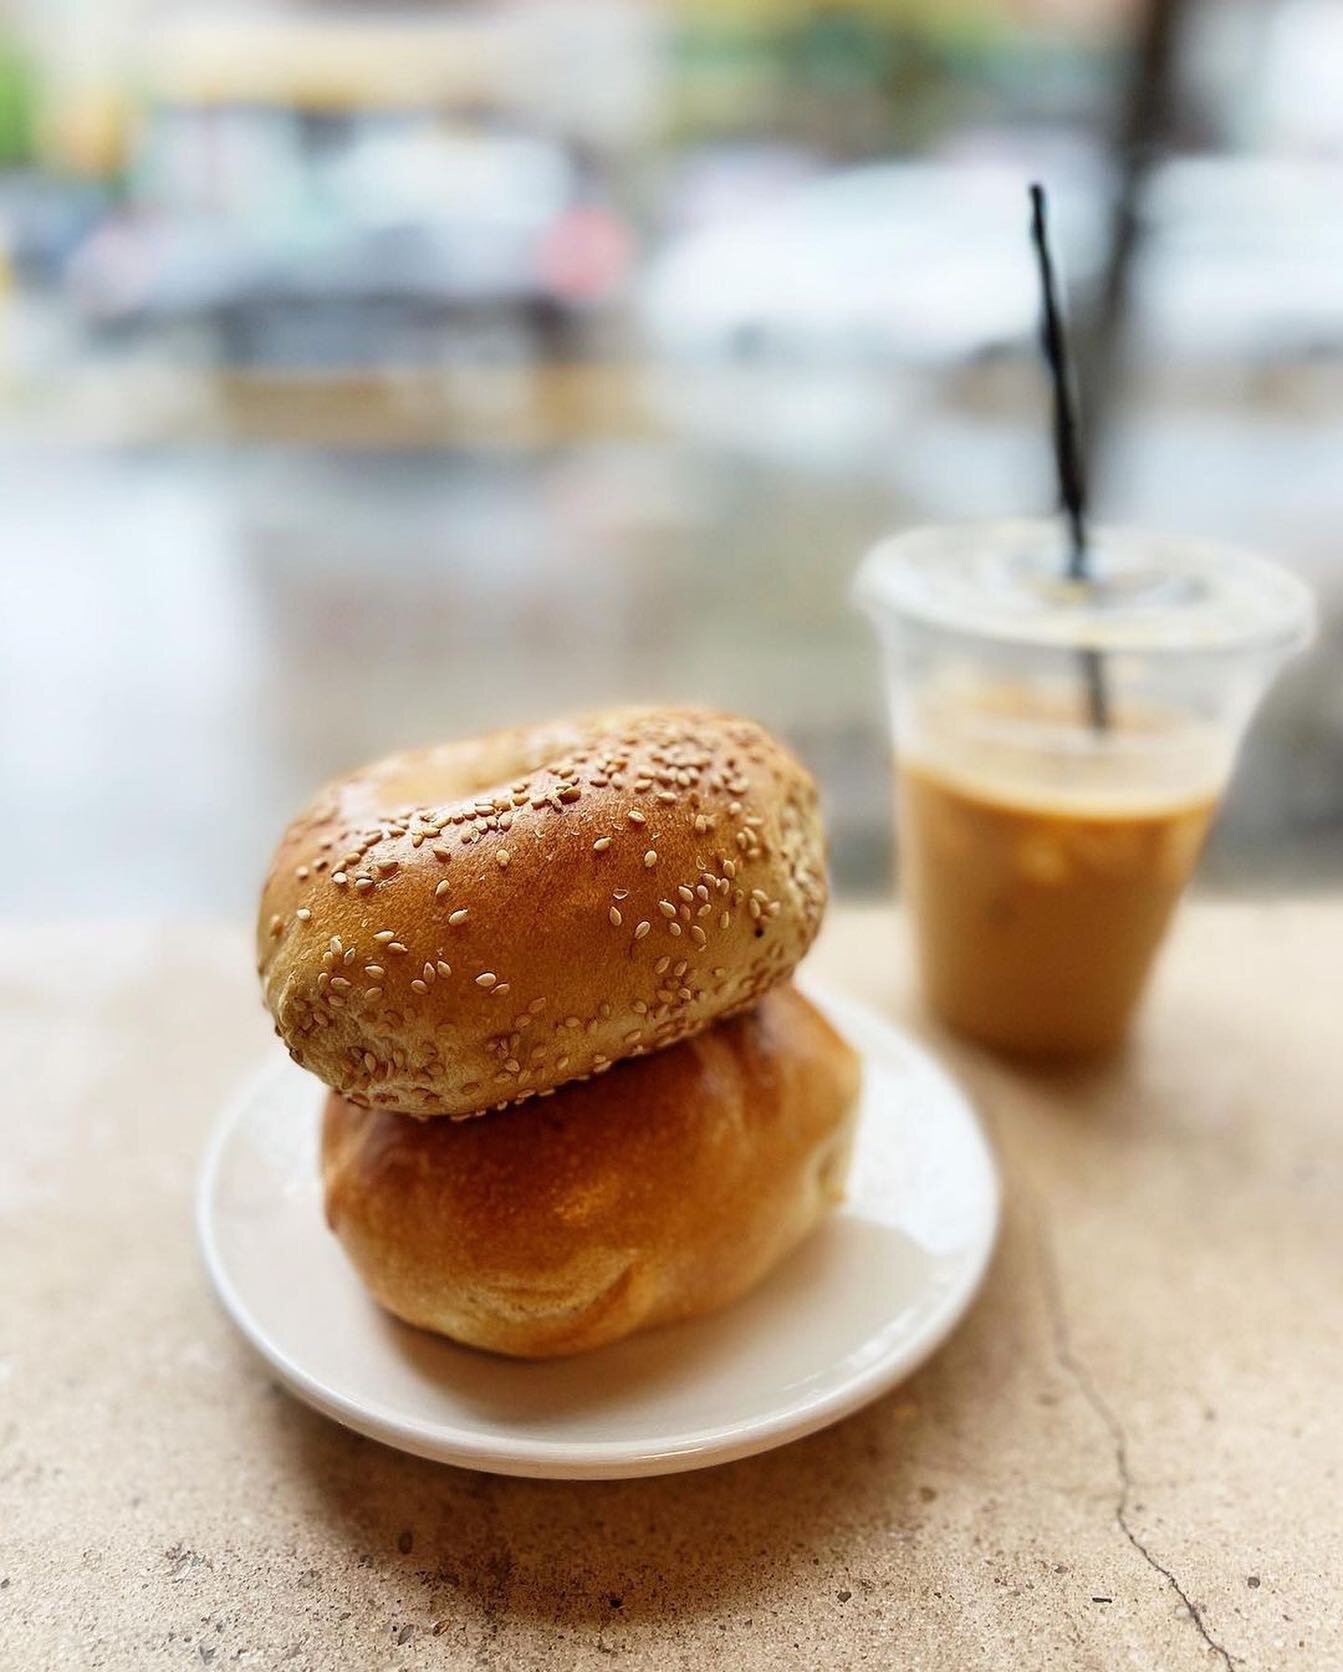 Good morning from our favorites friends 🥯 @utopiabagels ☕️ @partnerscoffee 

📷: @foodmuenster